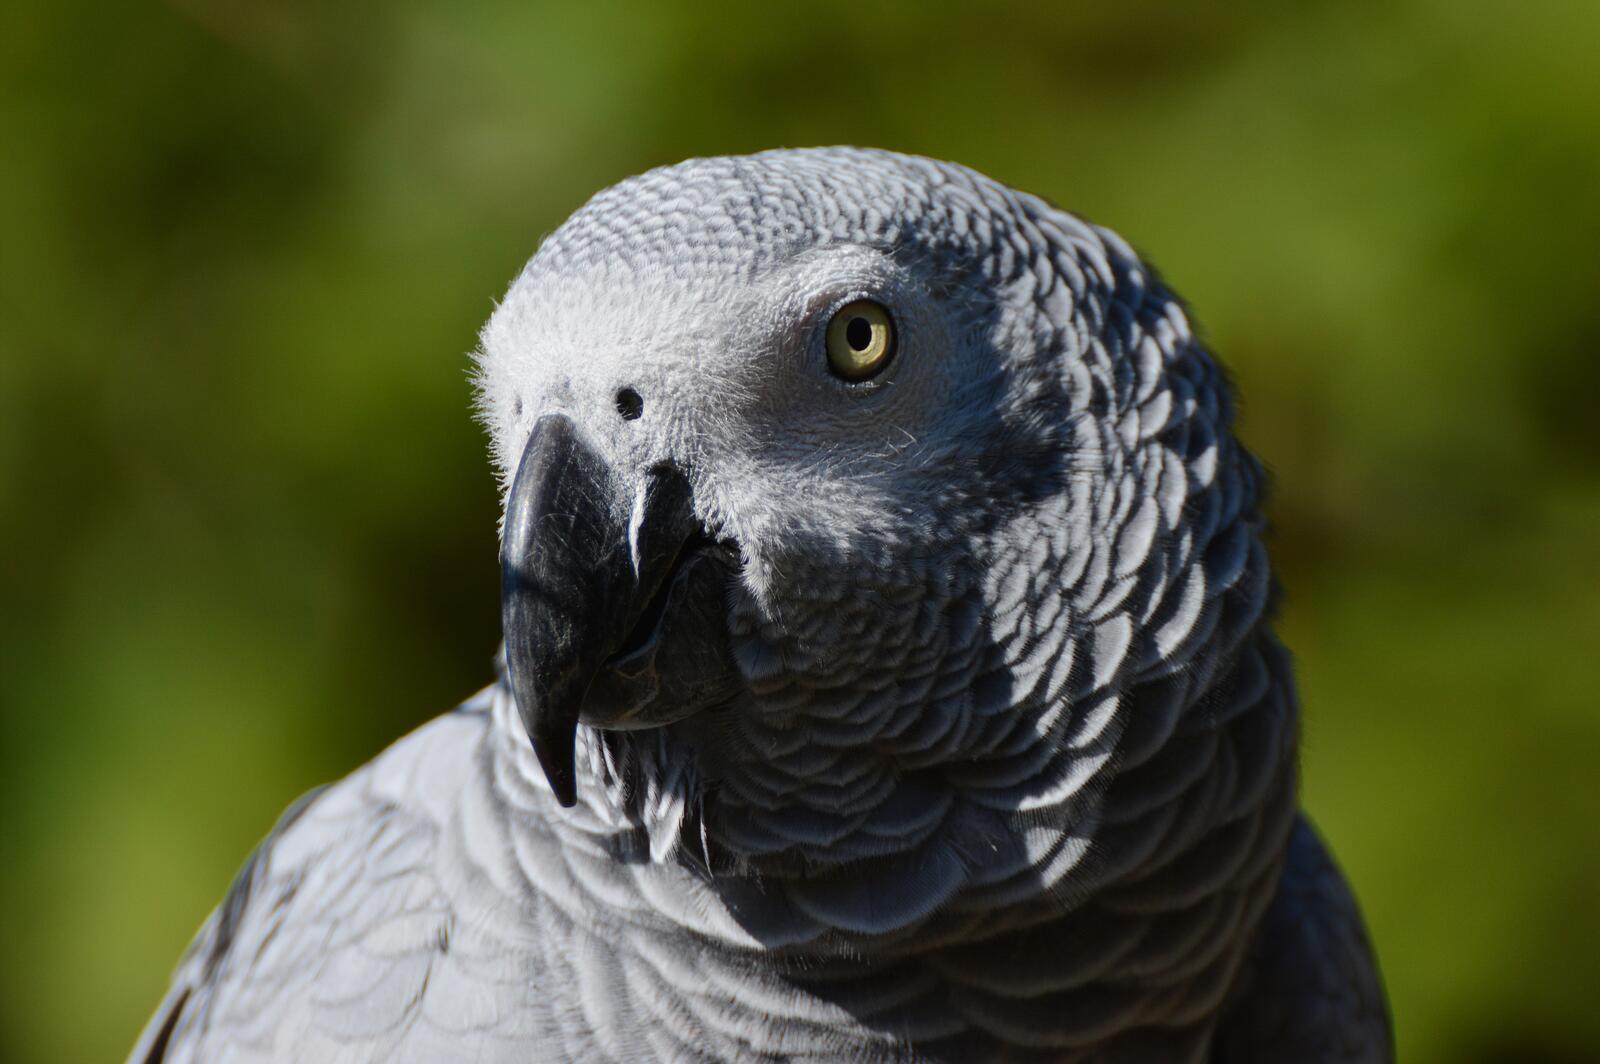 Free photo A gray parrot close-up